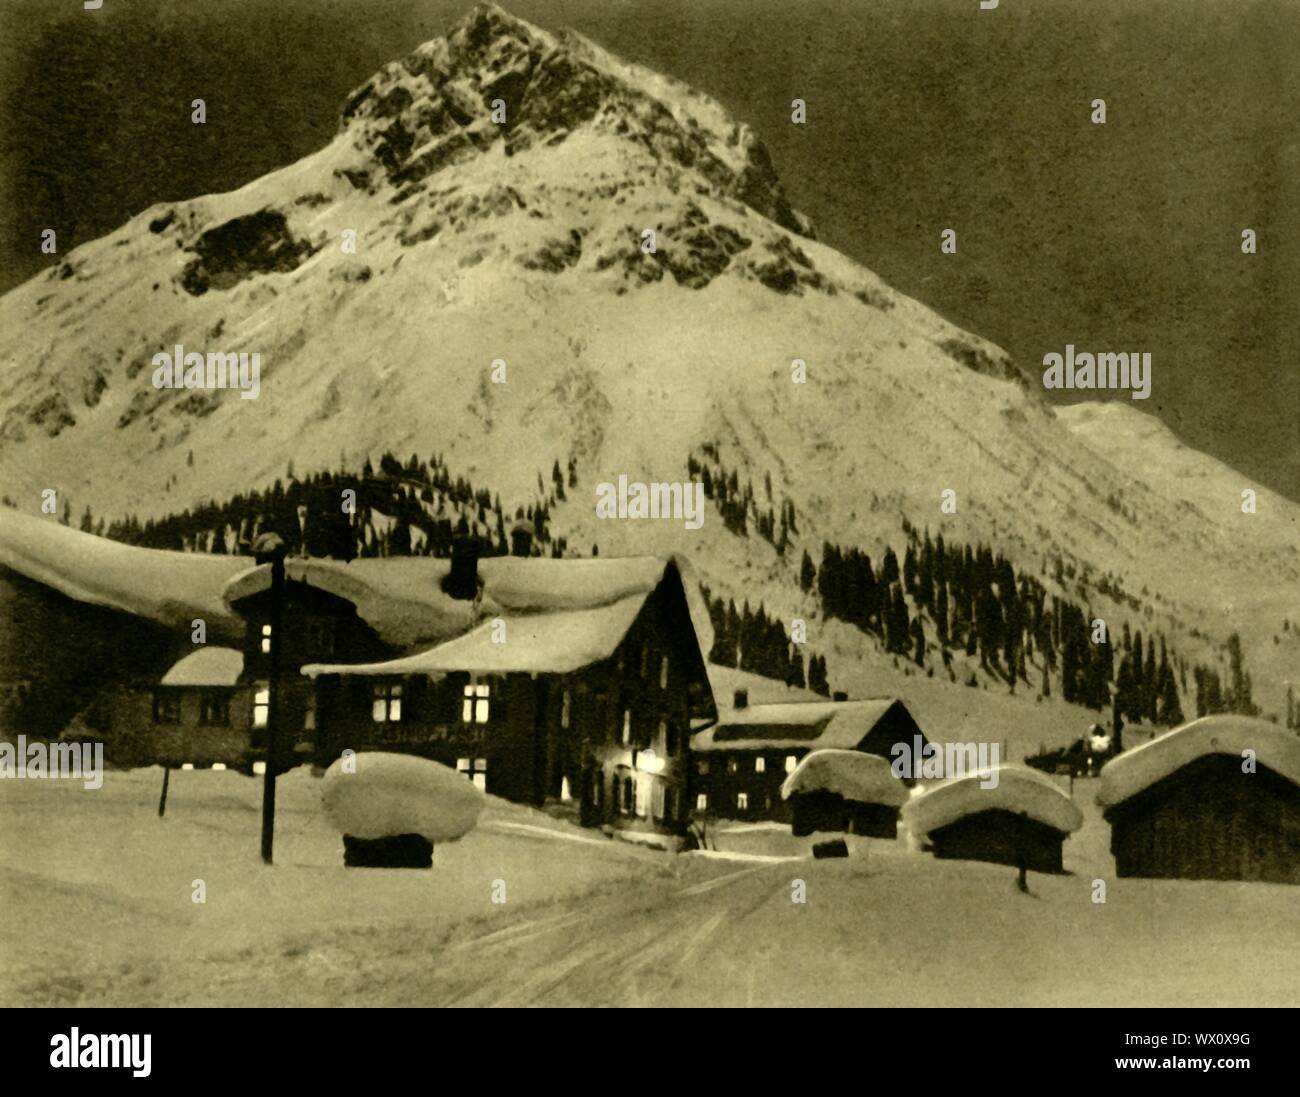 Lech am Arlberg at night, Austria, c1935. The ski resort of Lech by the  Arlberg mountain range, in the state of Vorarlberg. From  &quot;&#xd6;sterreich - Land Und Volk&quot;, (Austria, Land and People). [